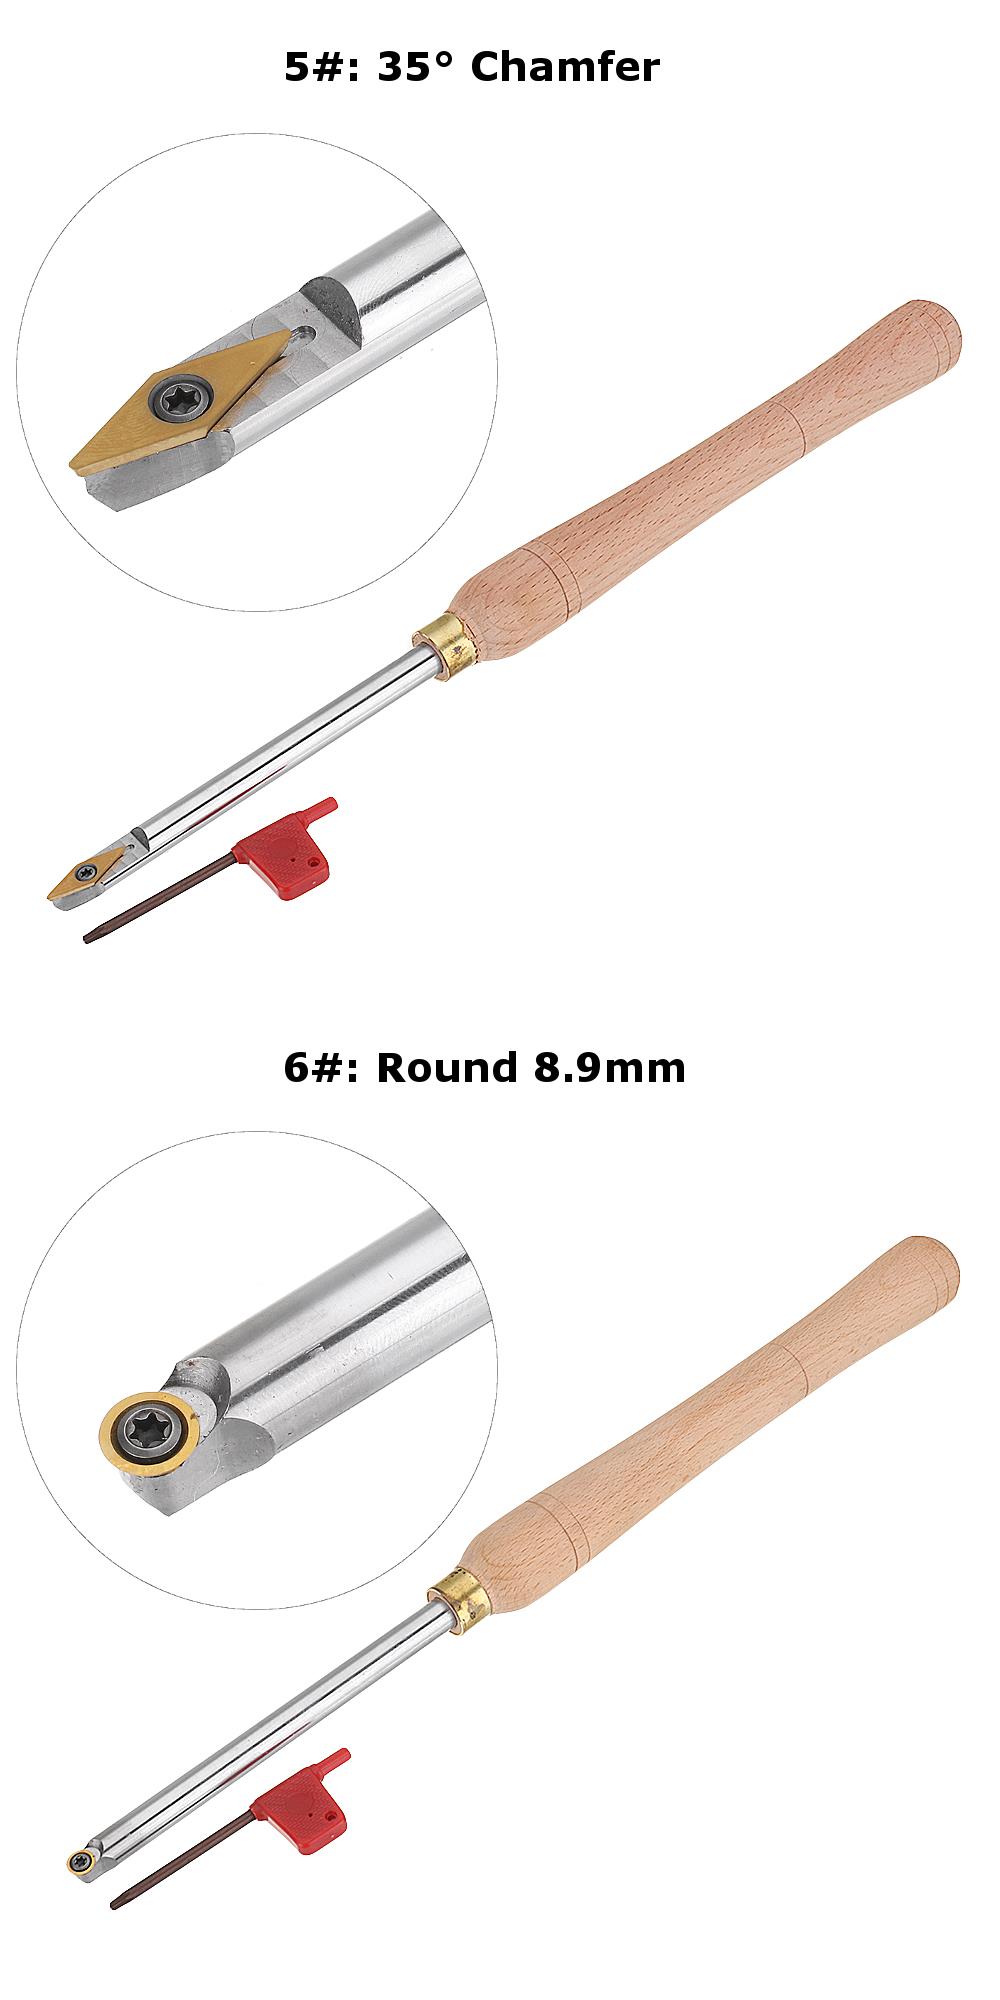 Drillpro-Wood-Turning-Tool-Wood-Handle-with-Titanium-Coated-Wood-Carbide-Insert-Cutter-Round-Shank-W-1456447-5